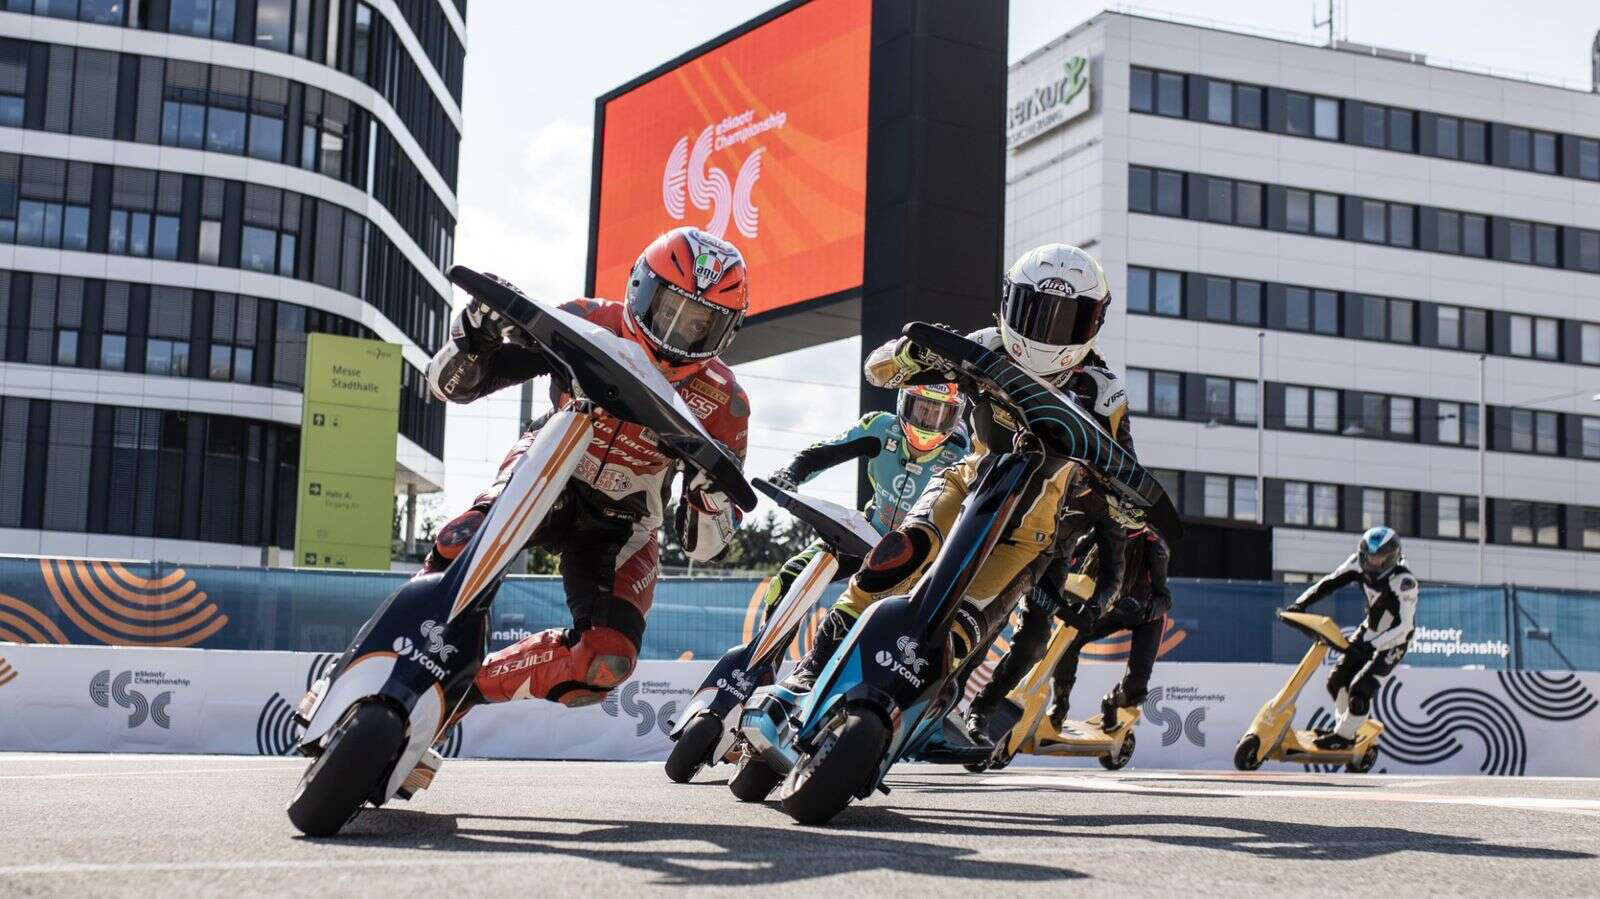 Dubai Sports Council to host the UAE’s first E-scooter race